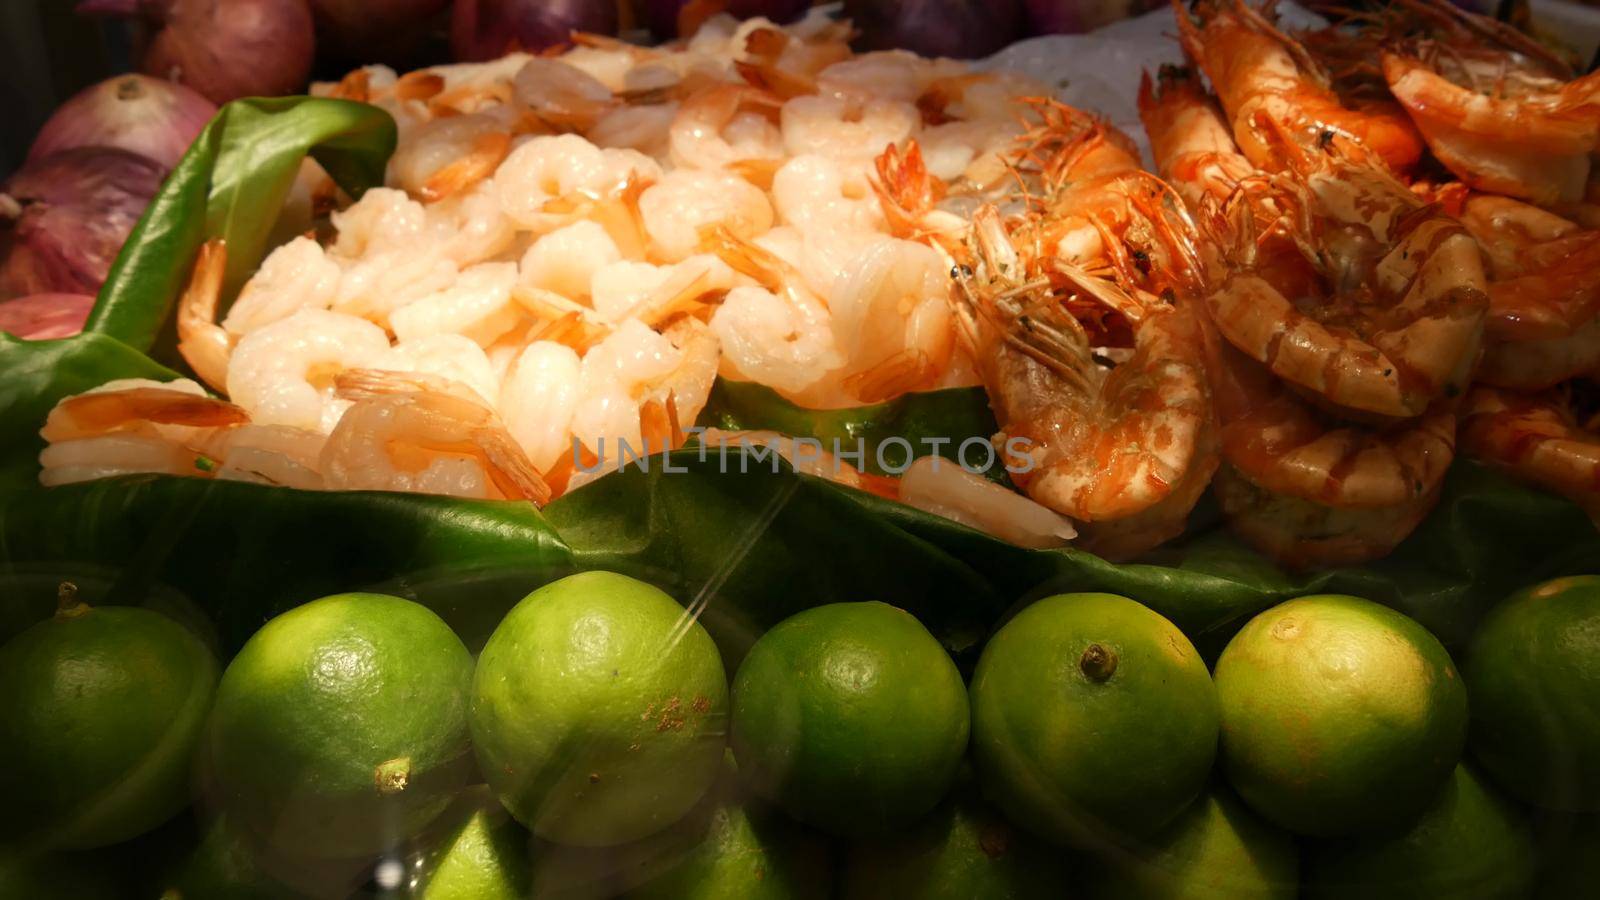 National Asian Exotic ready to eat seafood at night street market food court in Thailand. Delicious Grilled Prawns or Shrimps and other snacks. by DogoraSun